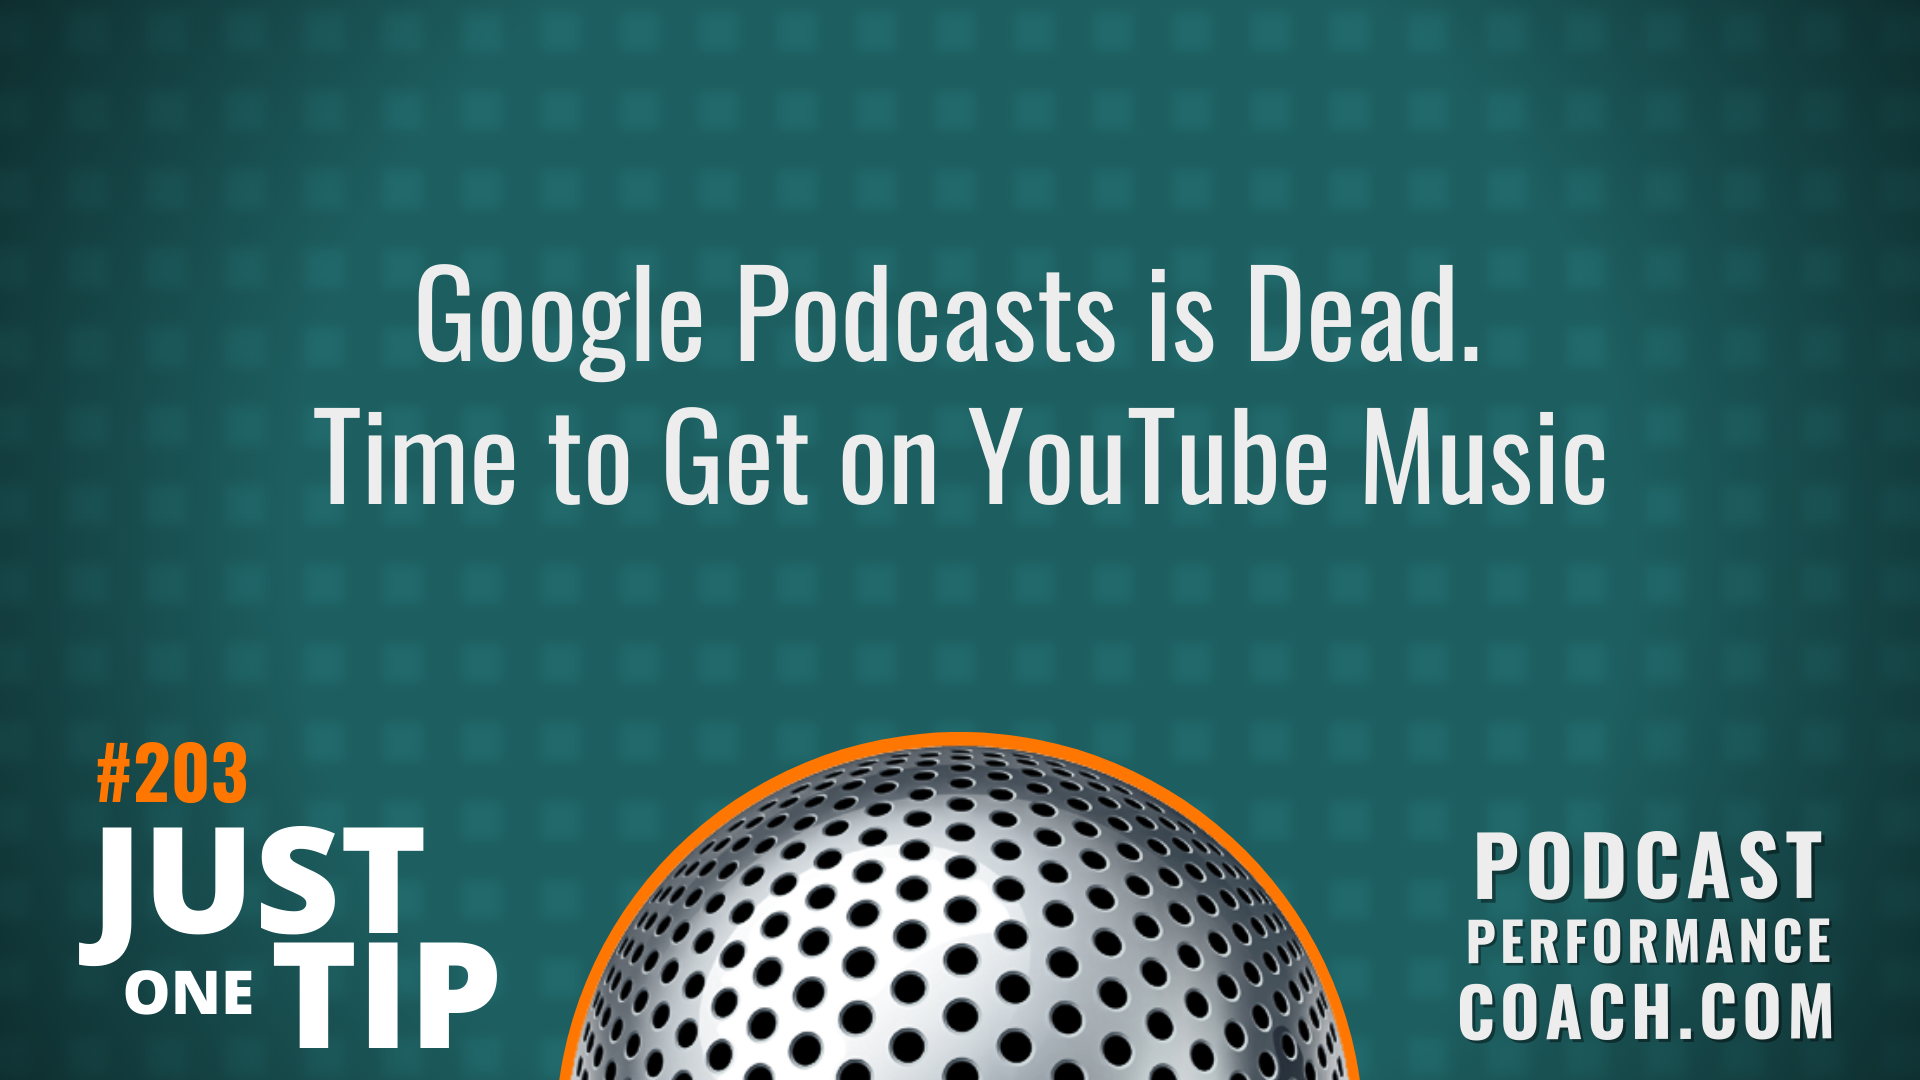 203 Google Podcasts is Dead. Here’s What Podcasters Need to Do to Get on YouTube Music Now